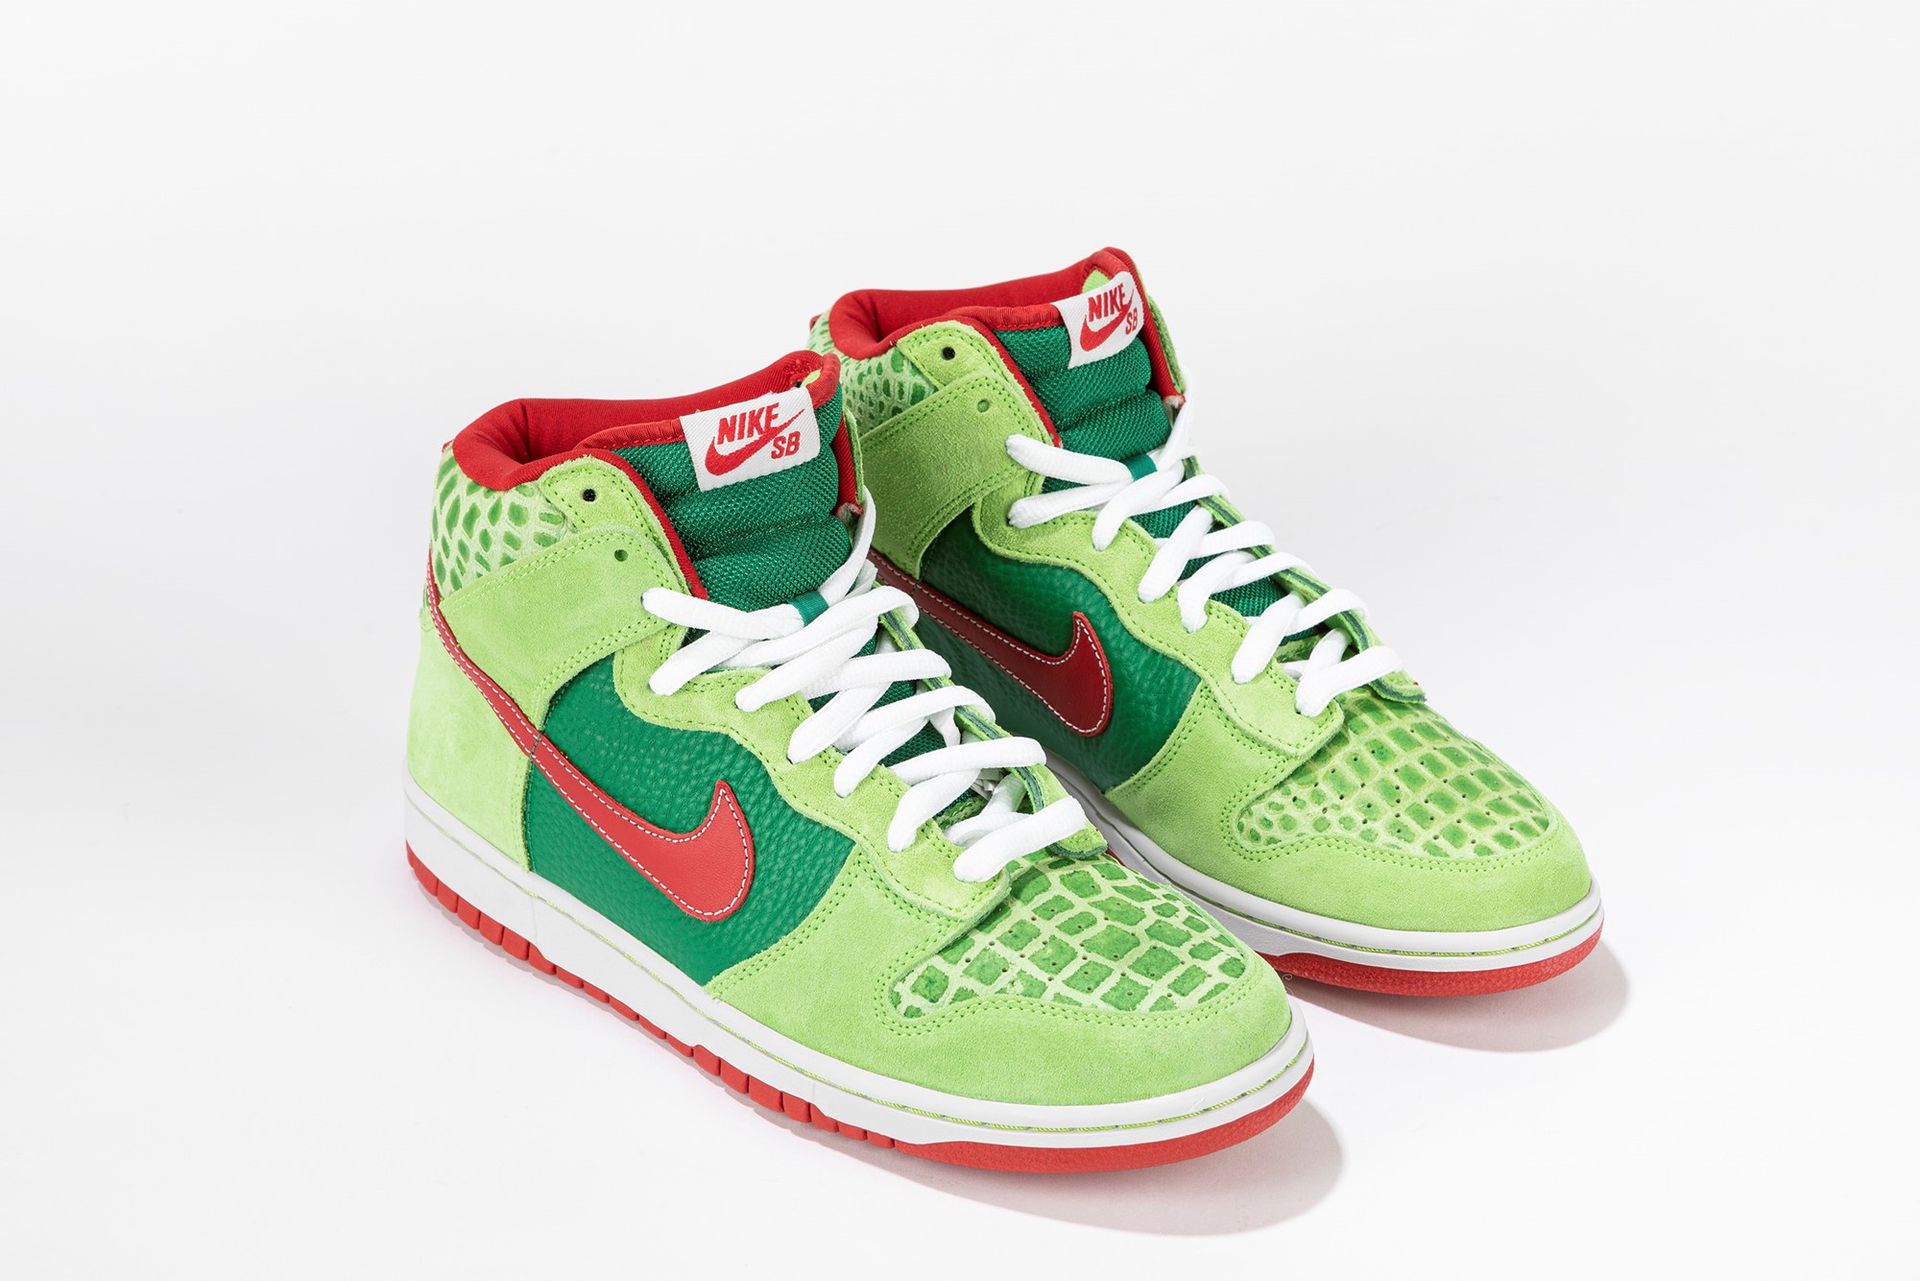 NIKE Dunk SB High Pro Dr. Feelgood | Taille US 10.5 EUR 44.5, 2008

Le Nike Dunk&hellip;